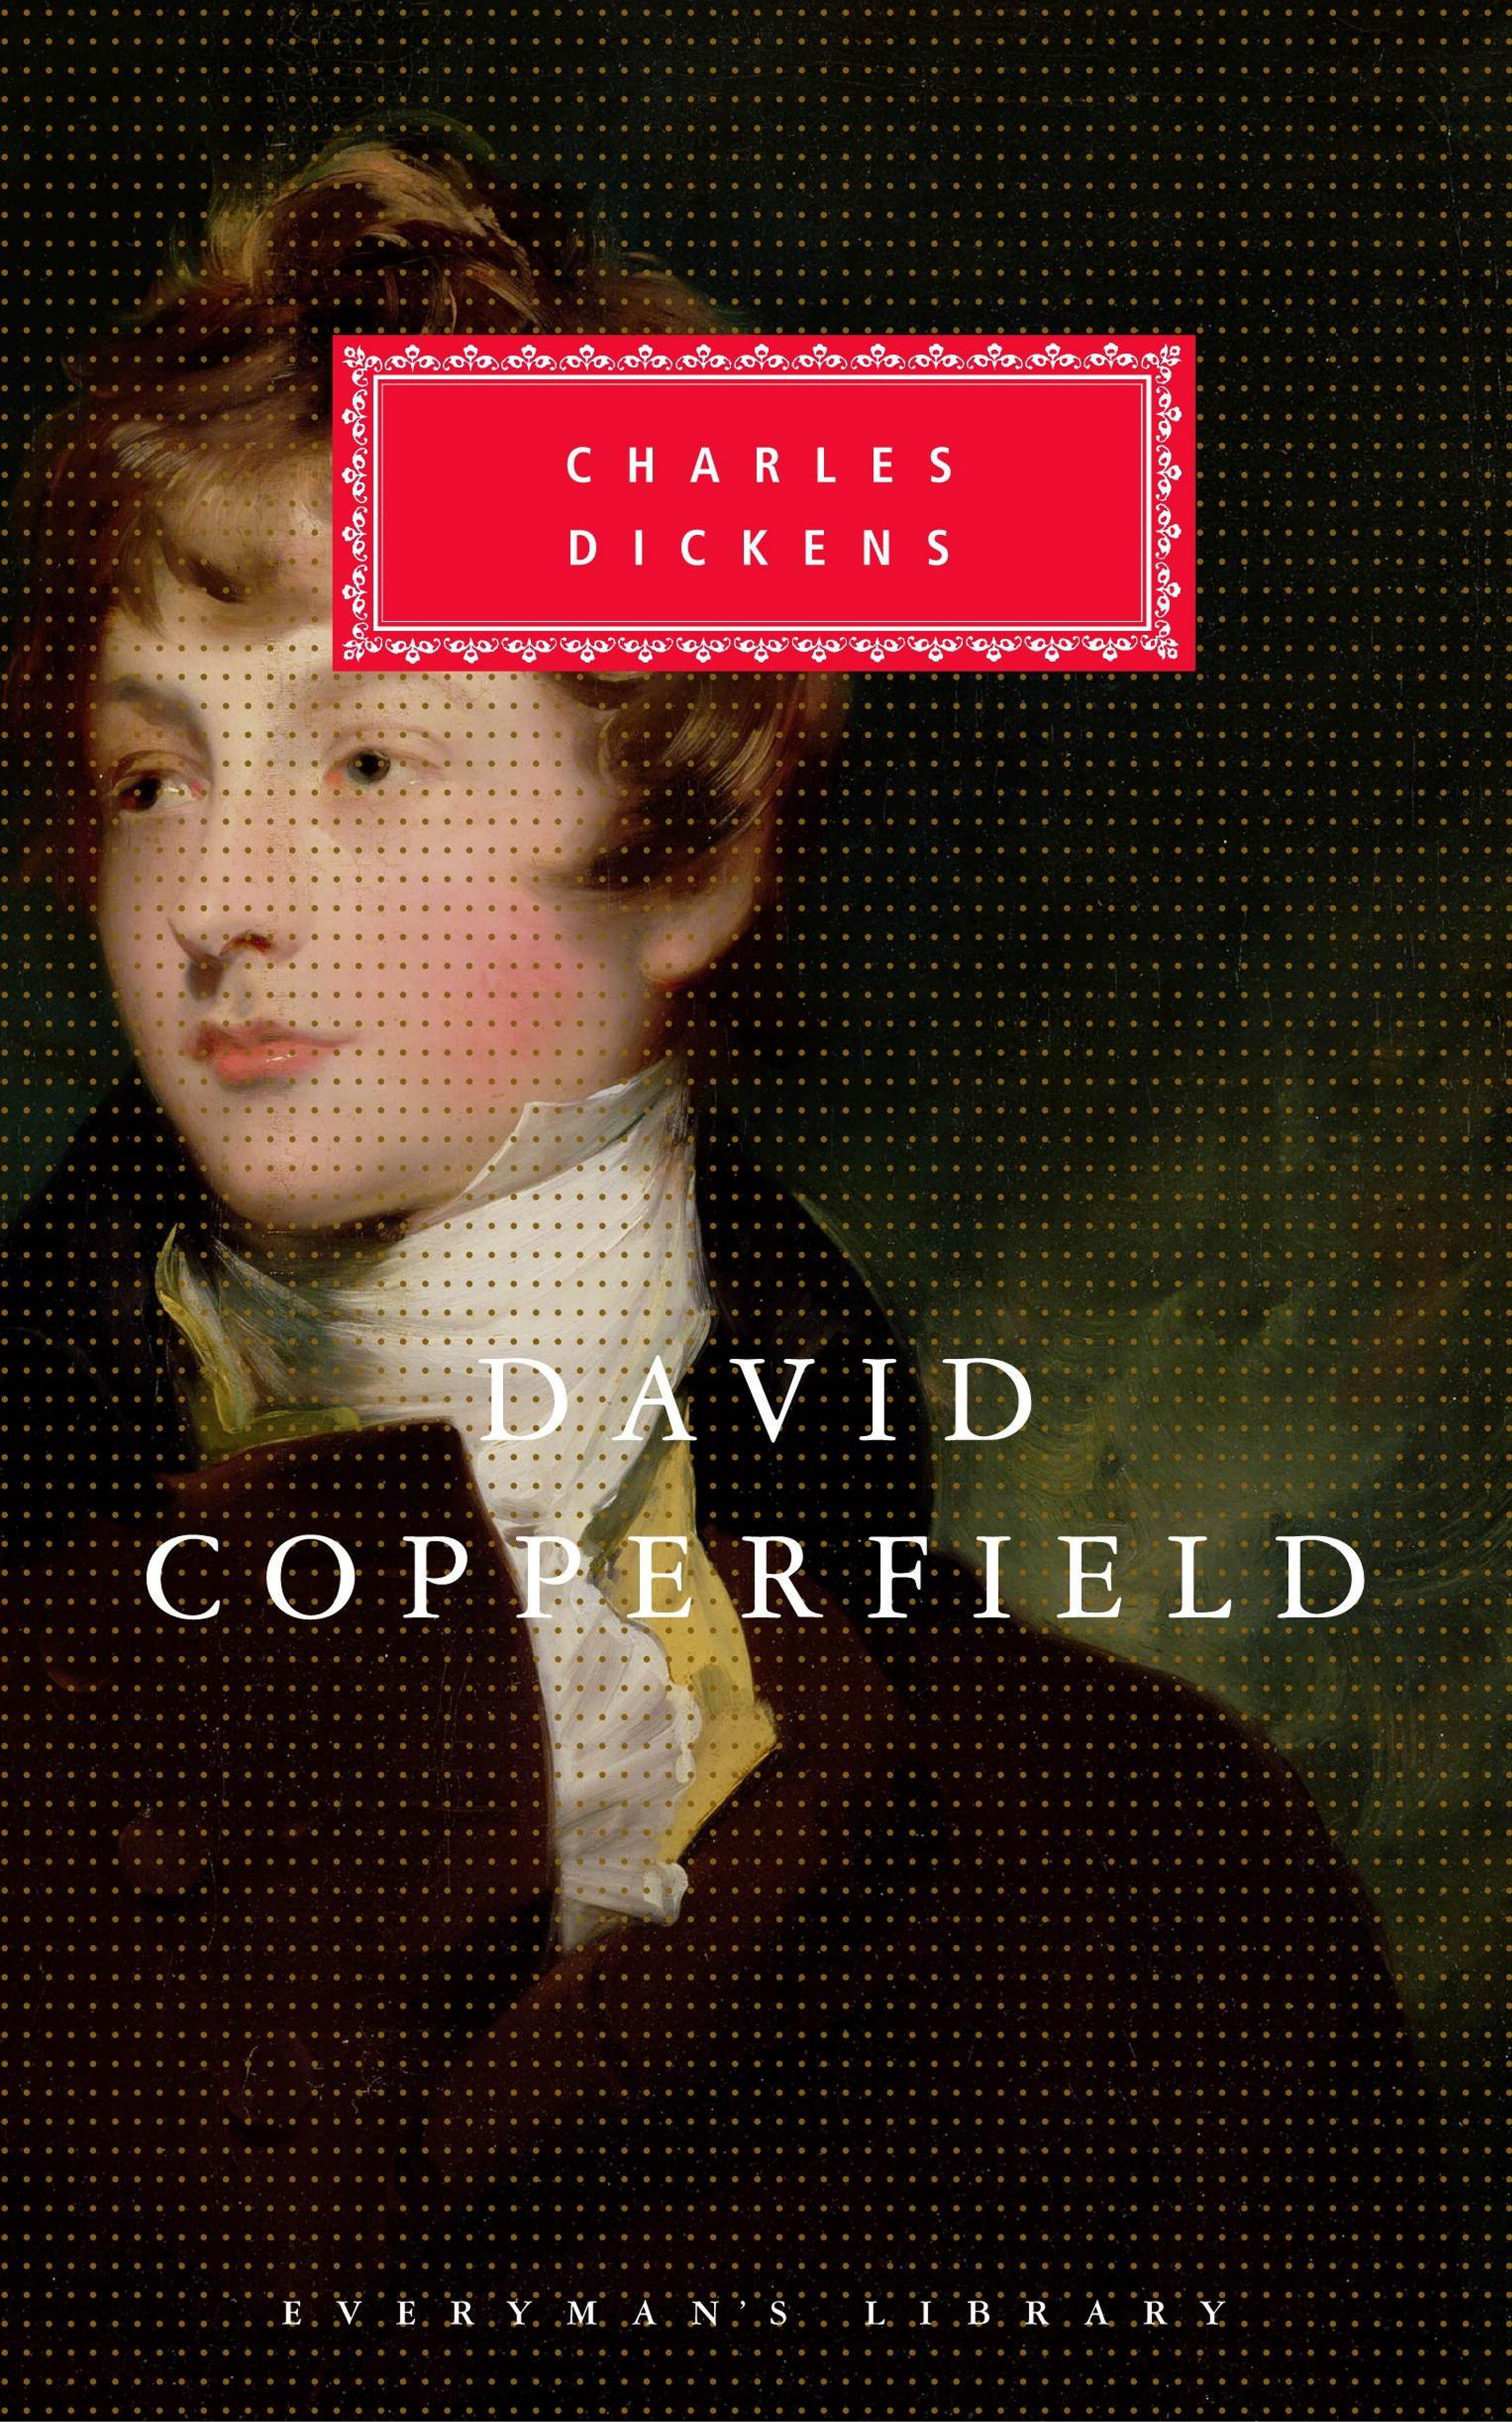 Book “David Copperfield” by Charles Dickens — September 26, 1991